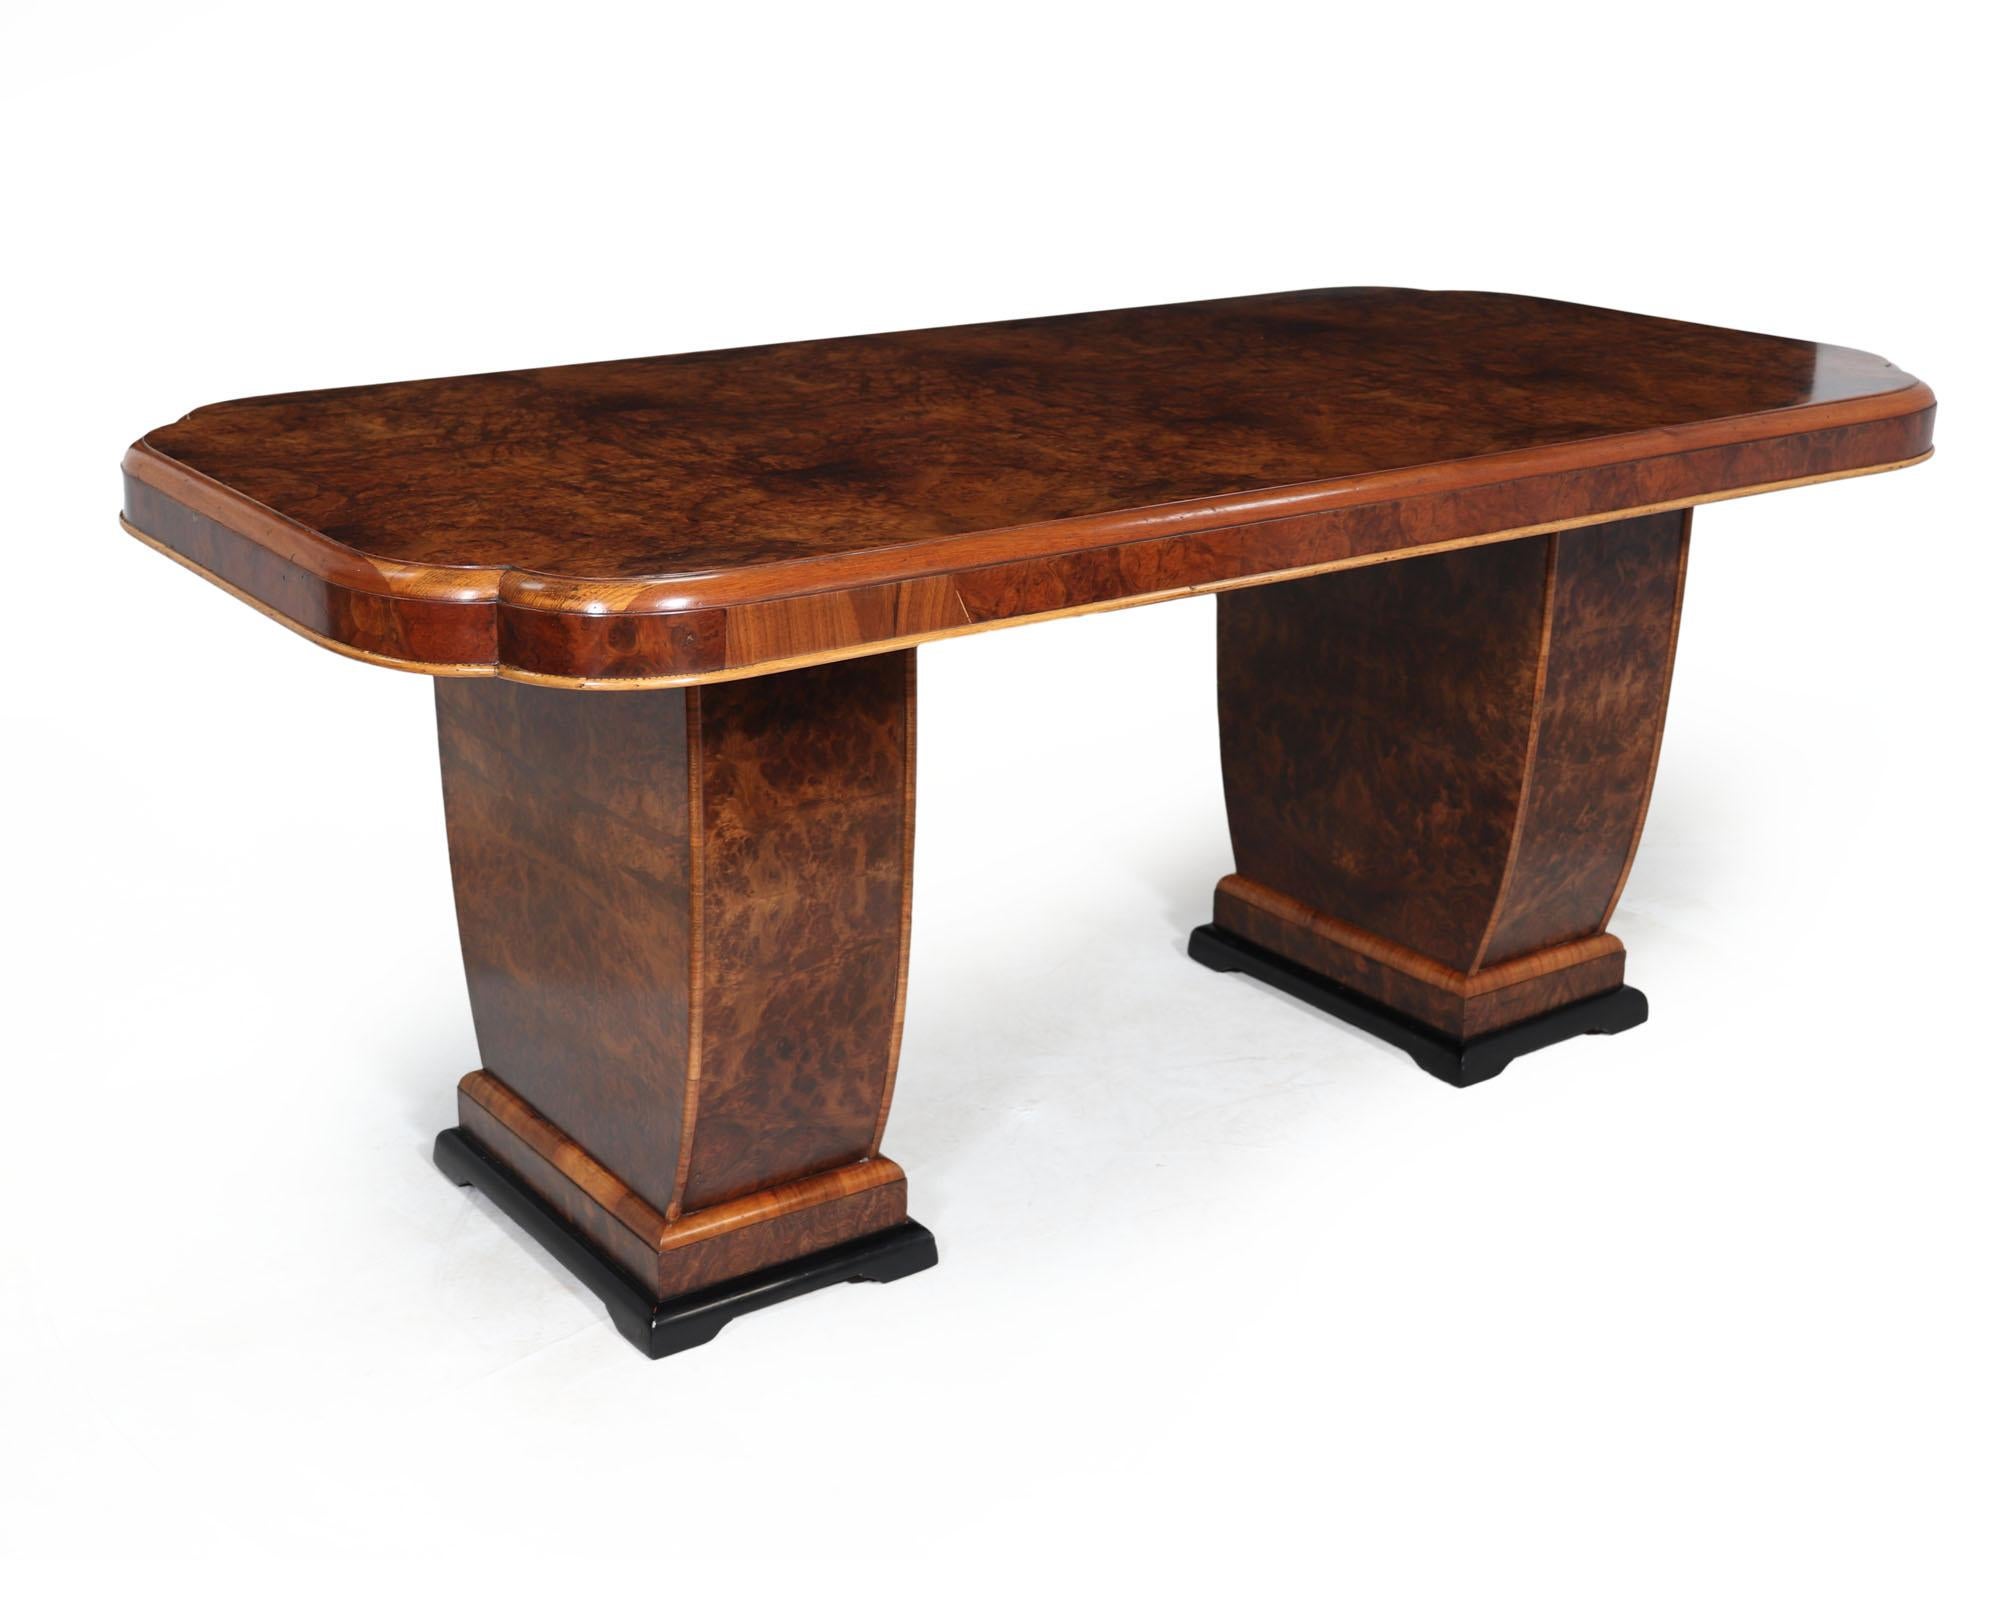 Walnut Art Deco Dining Table and Chairs by Hille